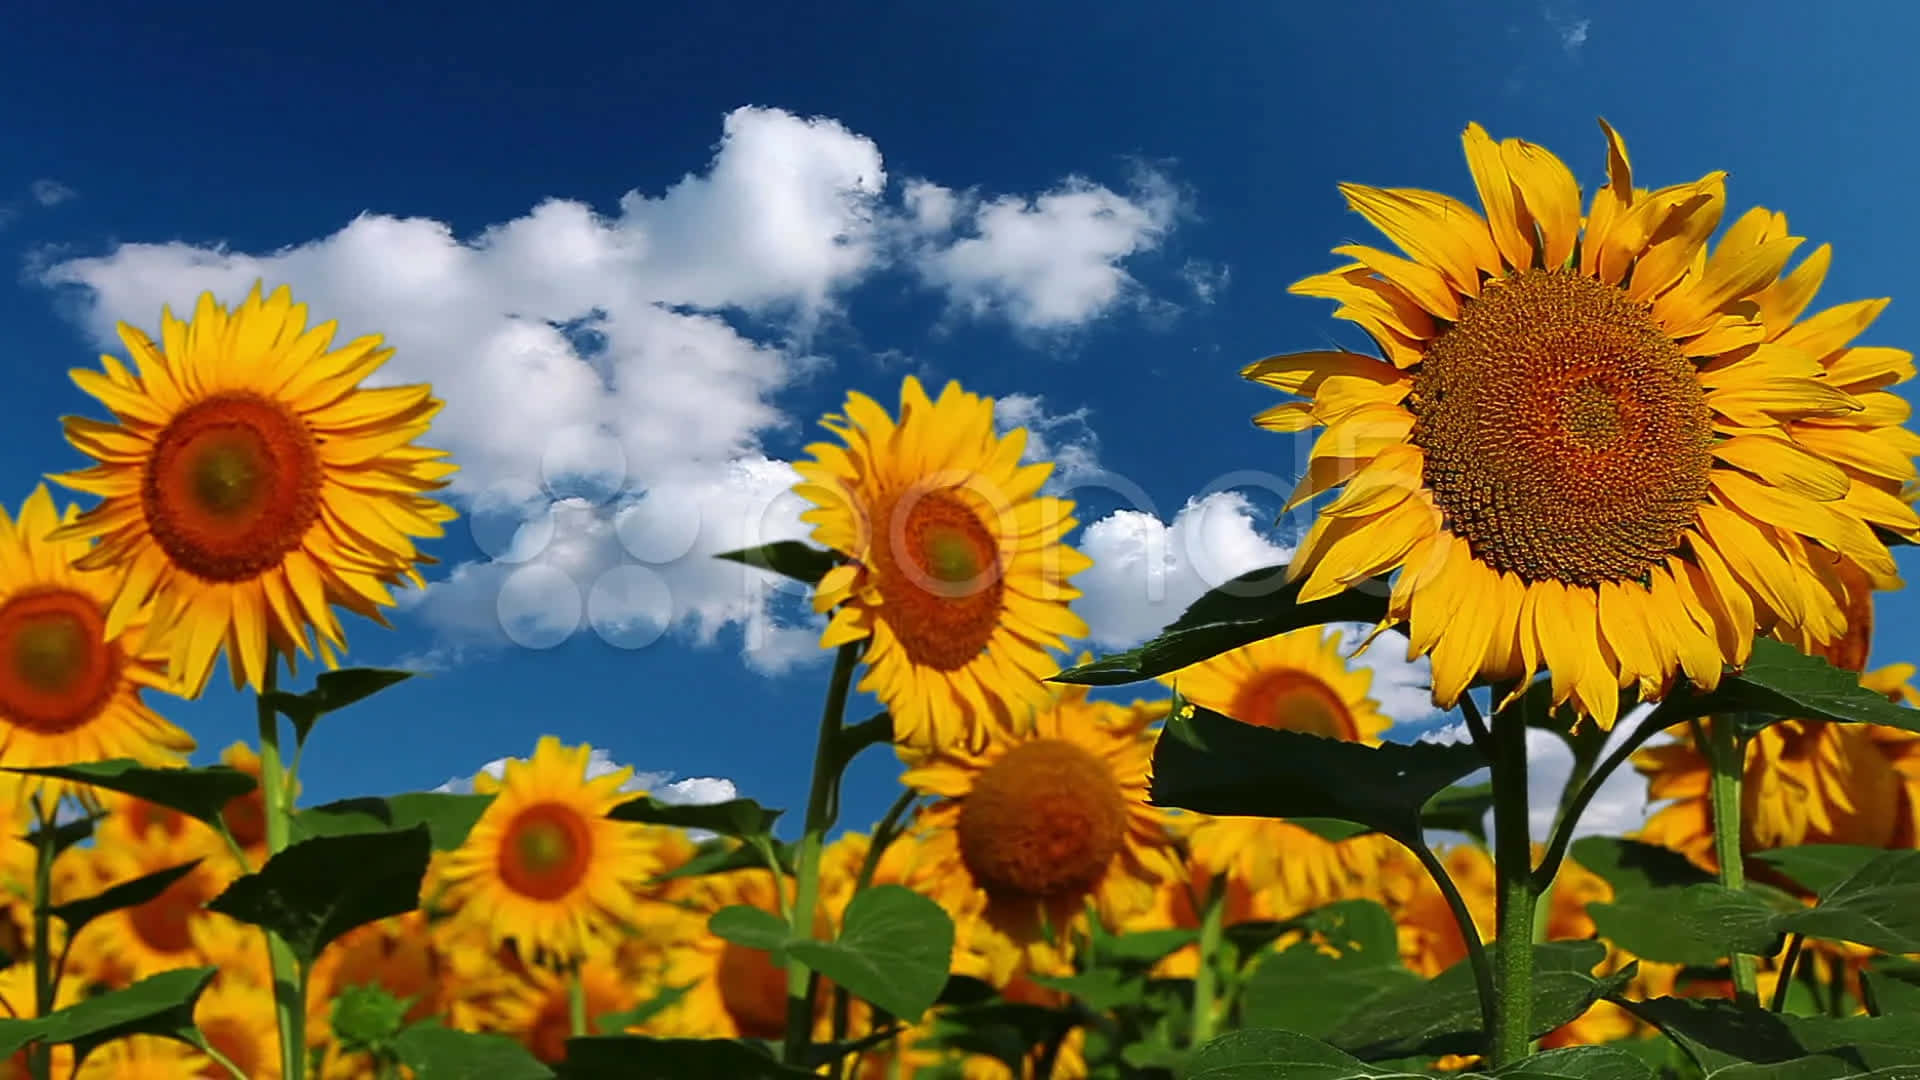 “A Bright and Cheerful Yellow Sunflower to Lift Your Mood” Wallpaper